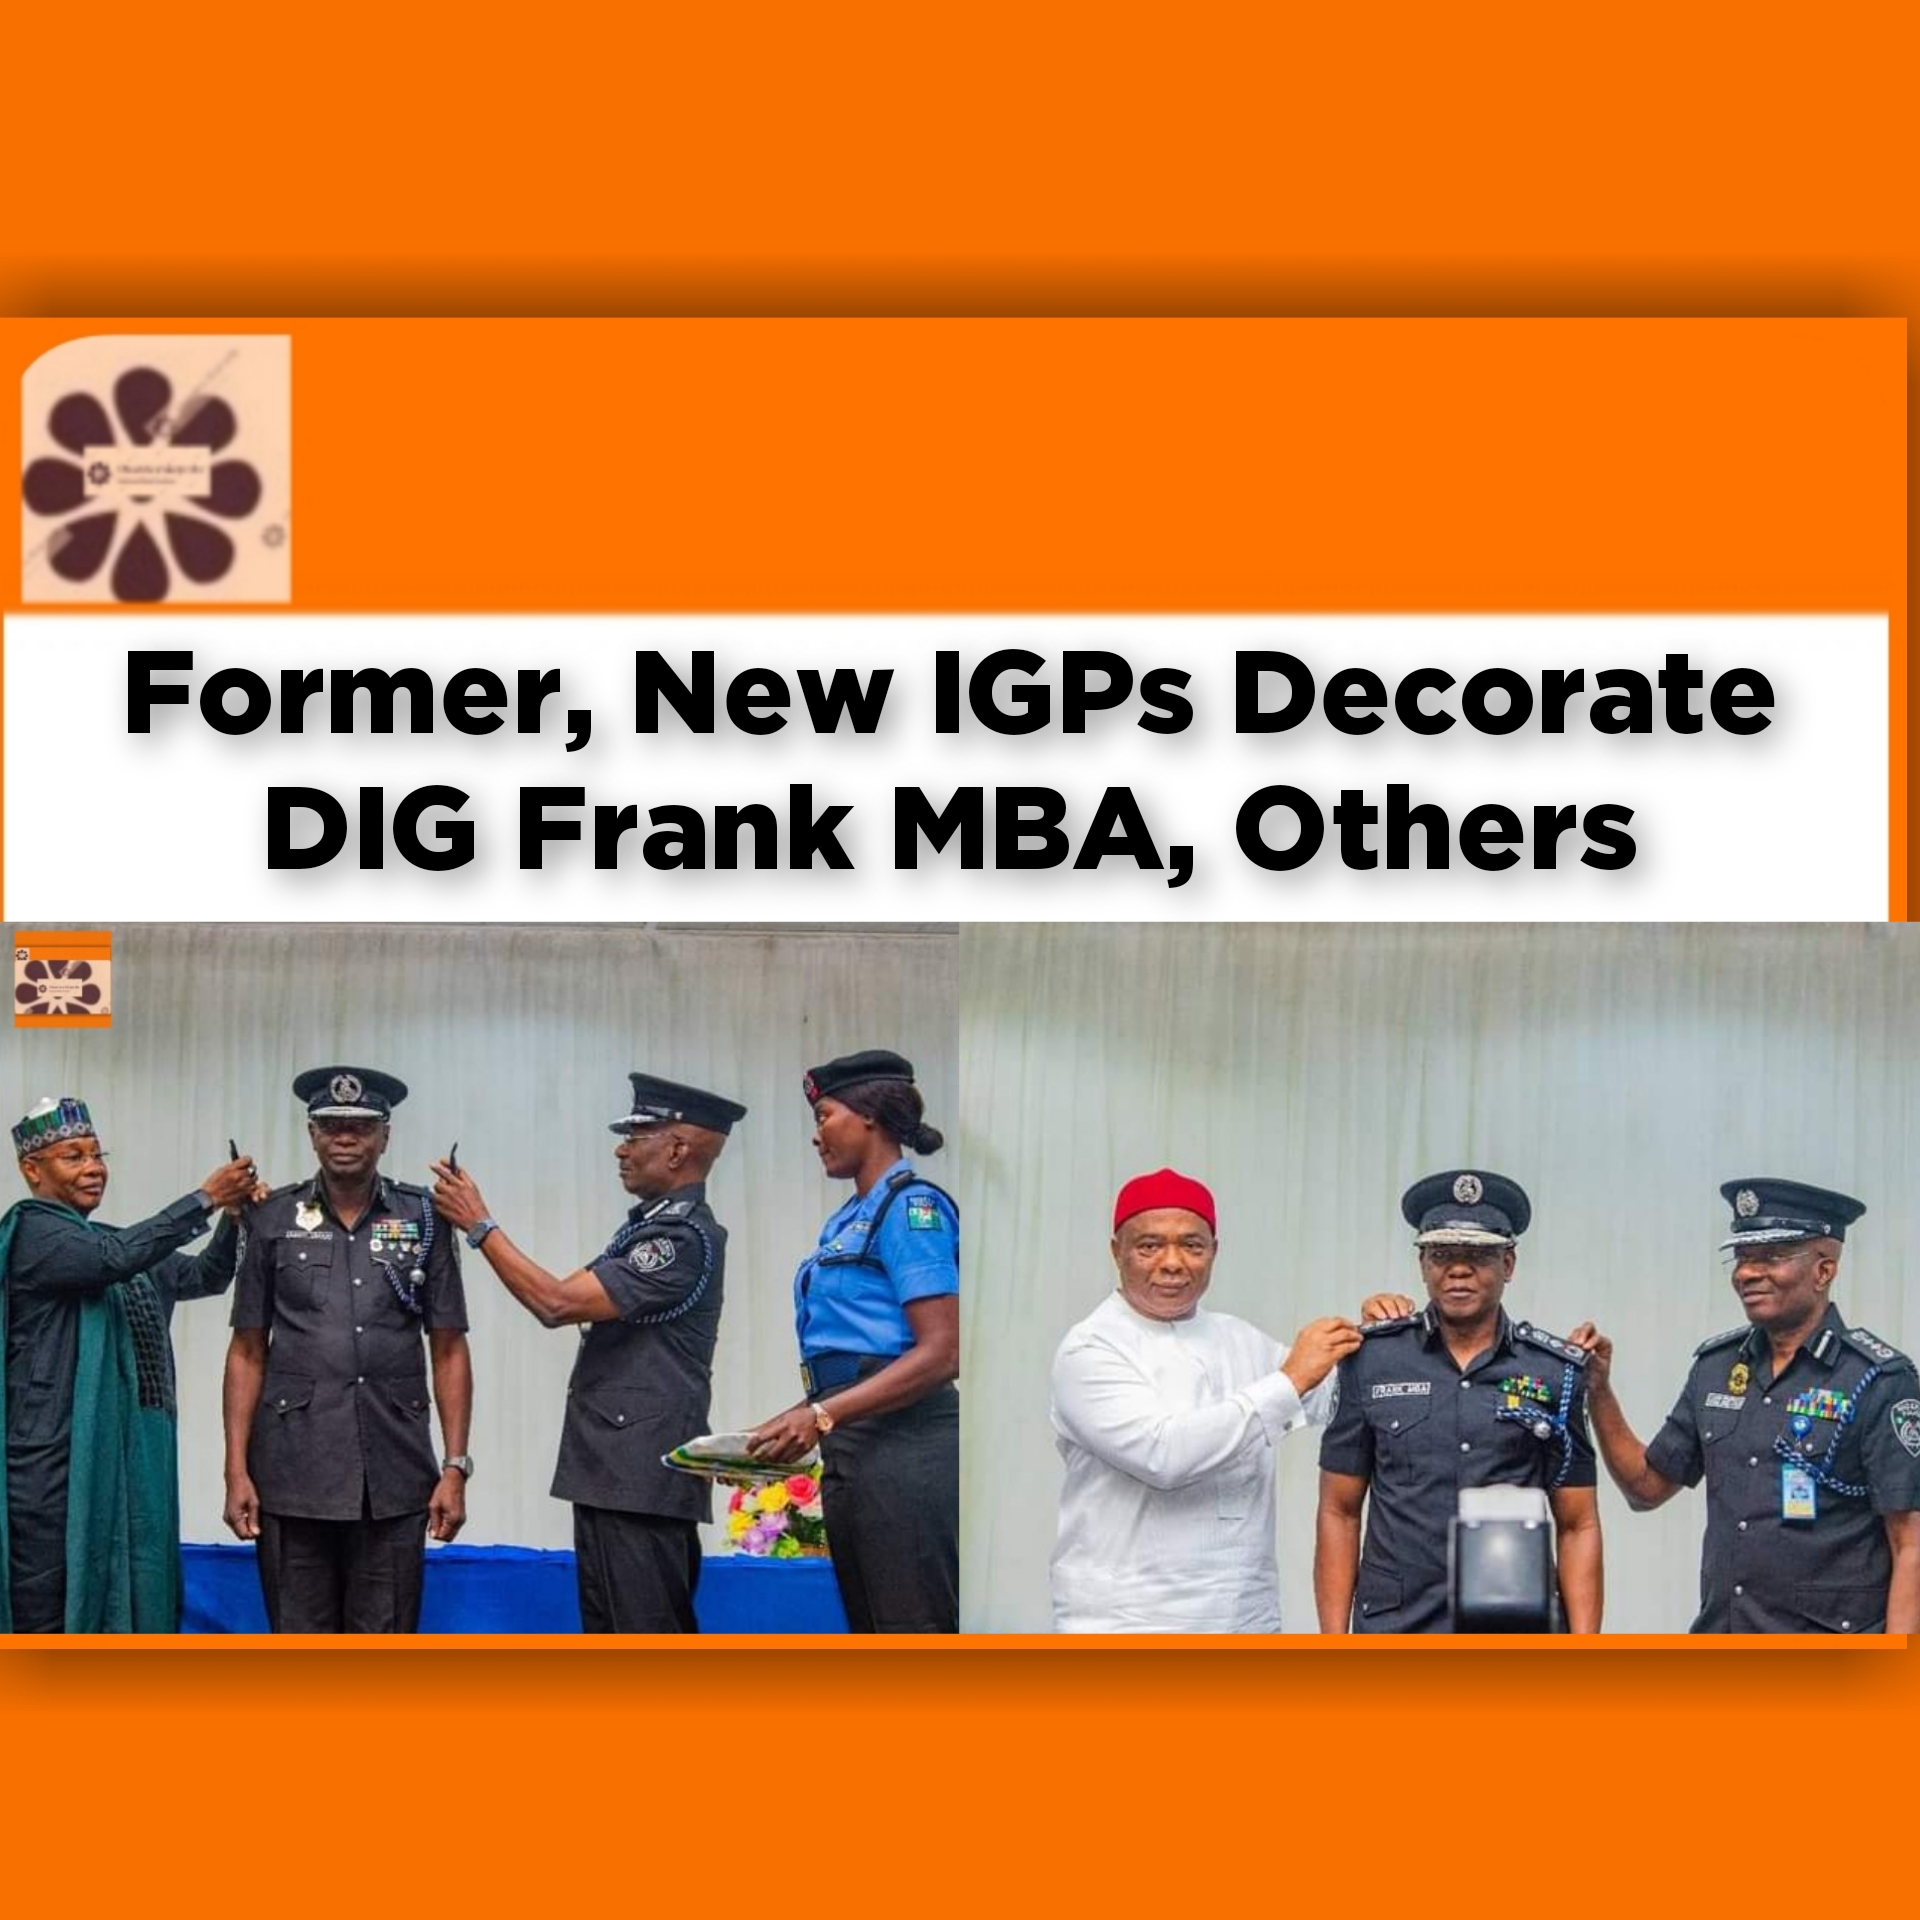 Former, New IGPs Decorate DIG Frank MBA, Others